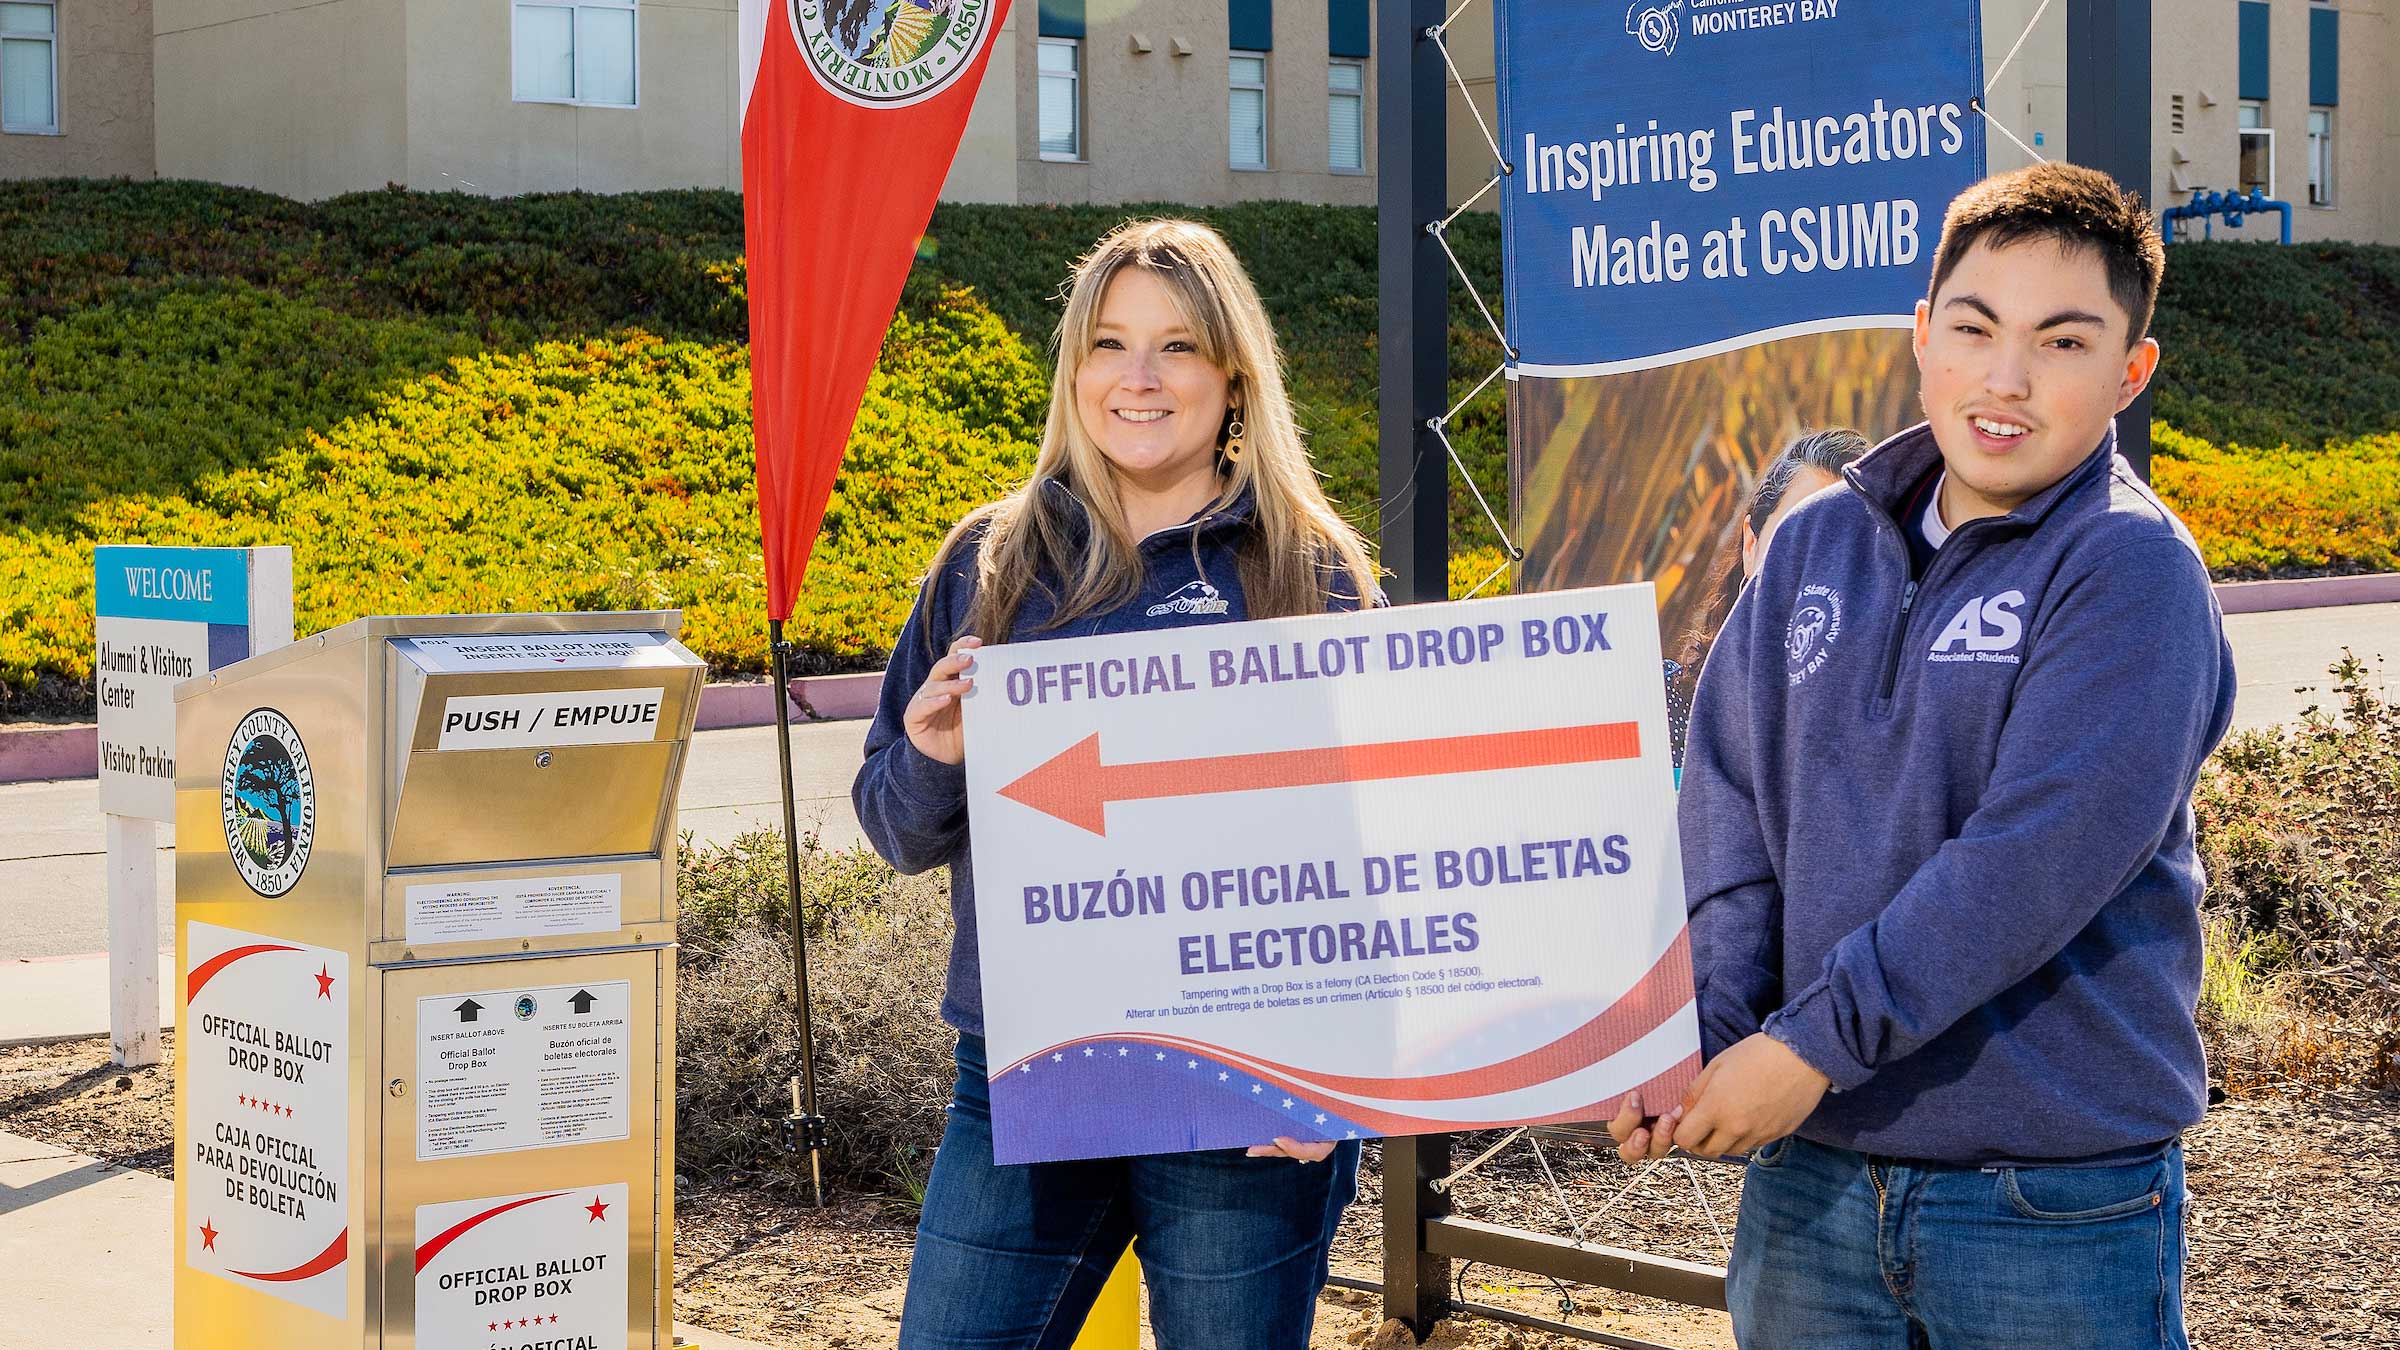 Nicole Hollingsworth and Javier Frias Origel next to an official ballot drop box